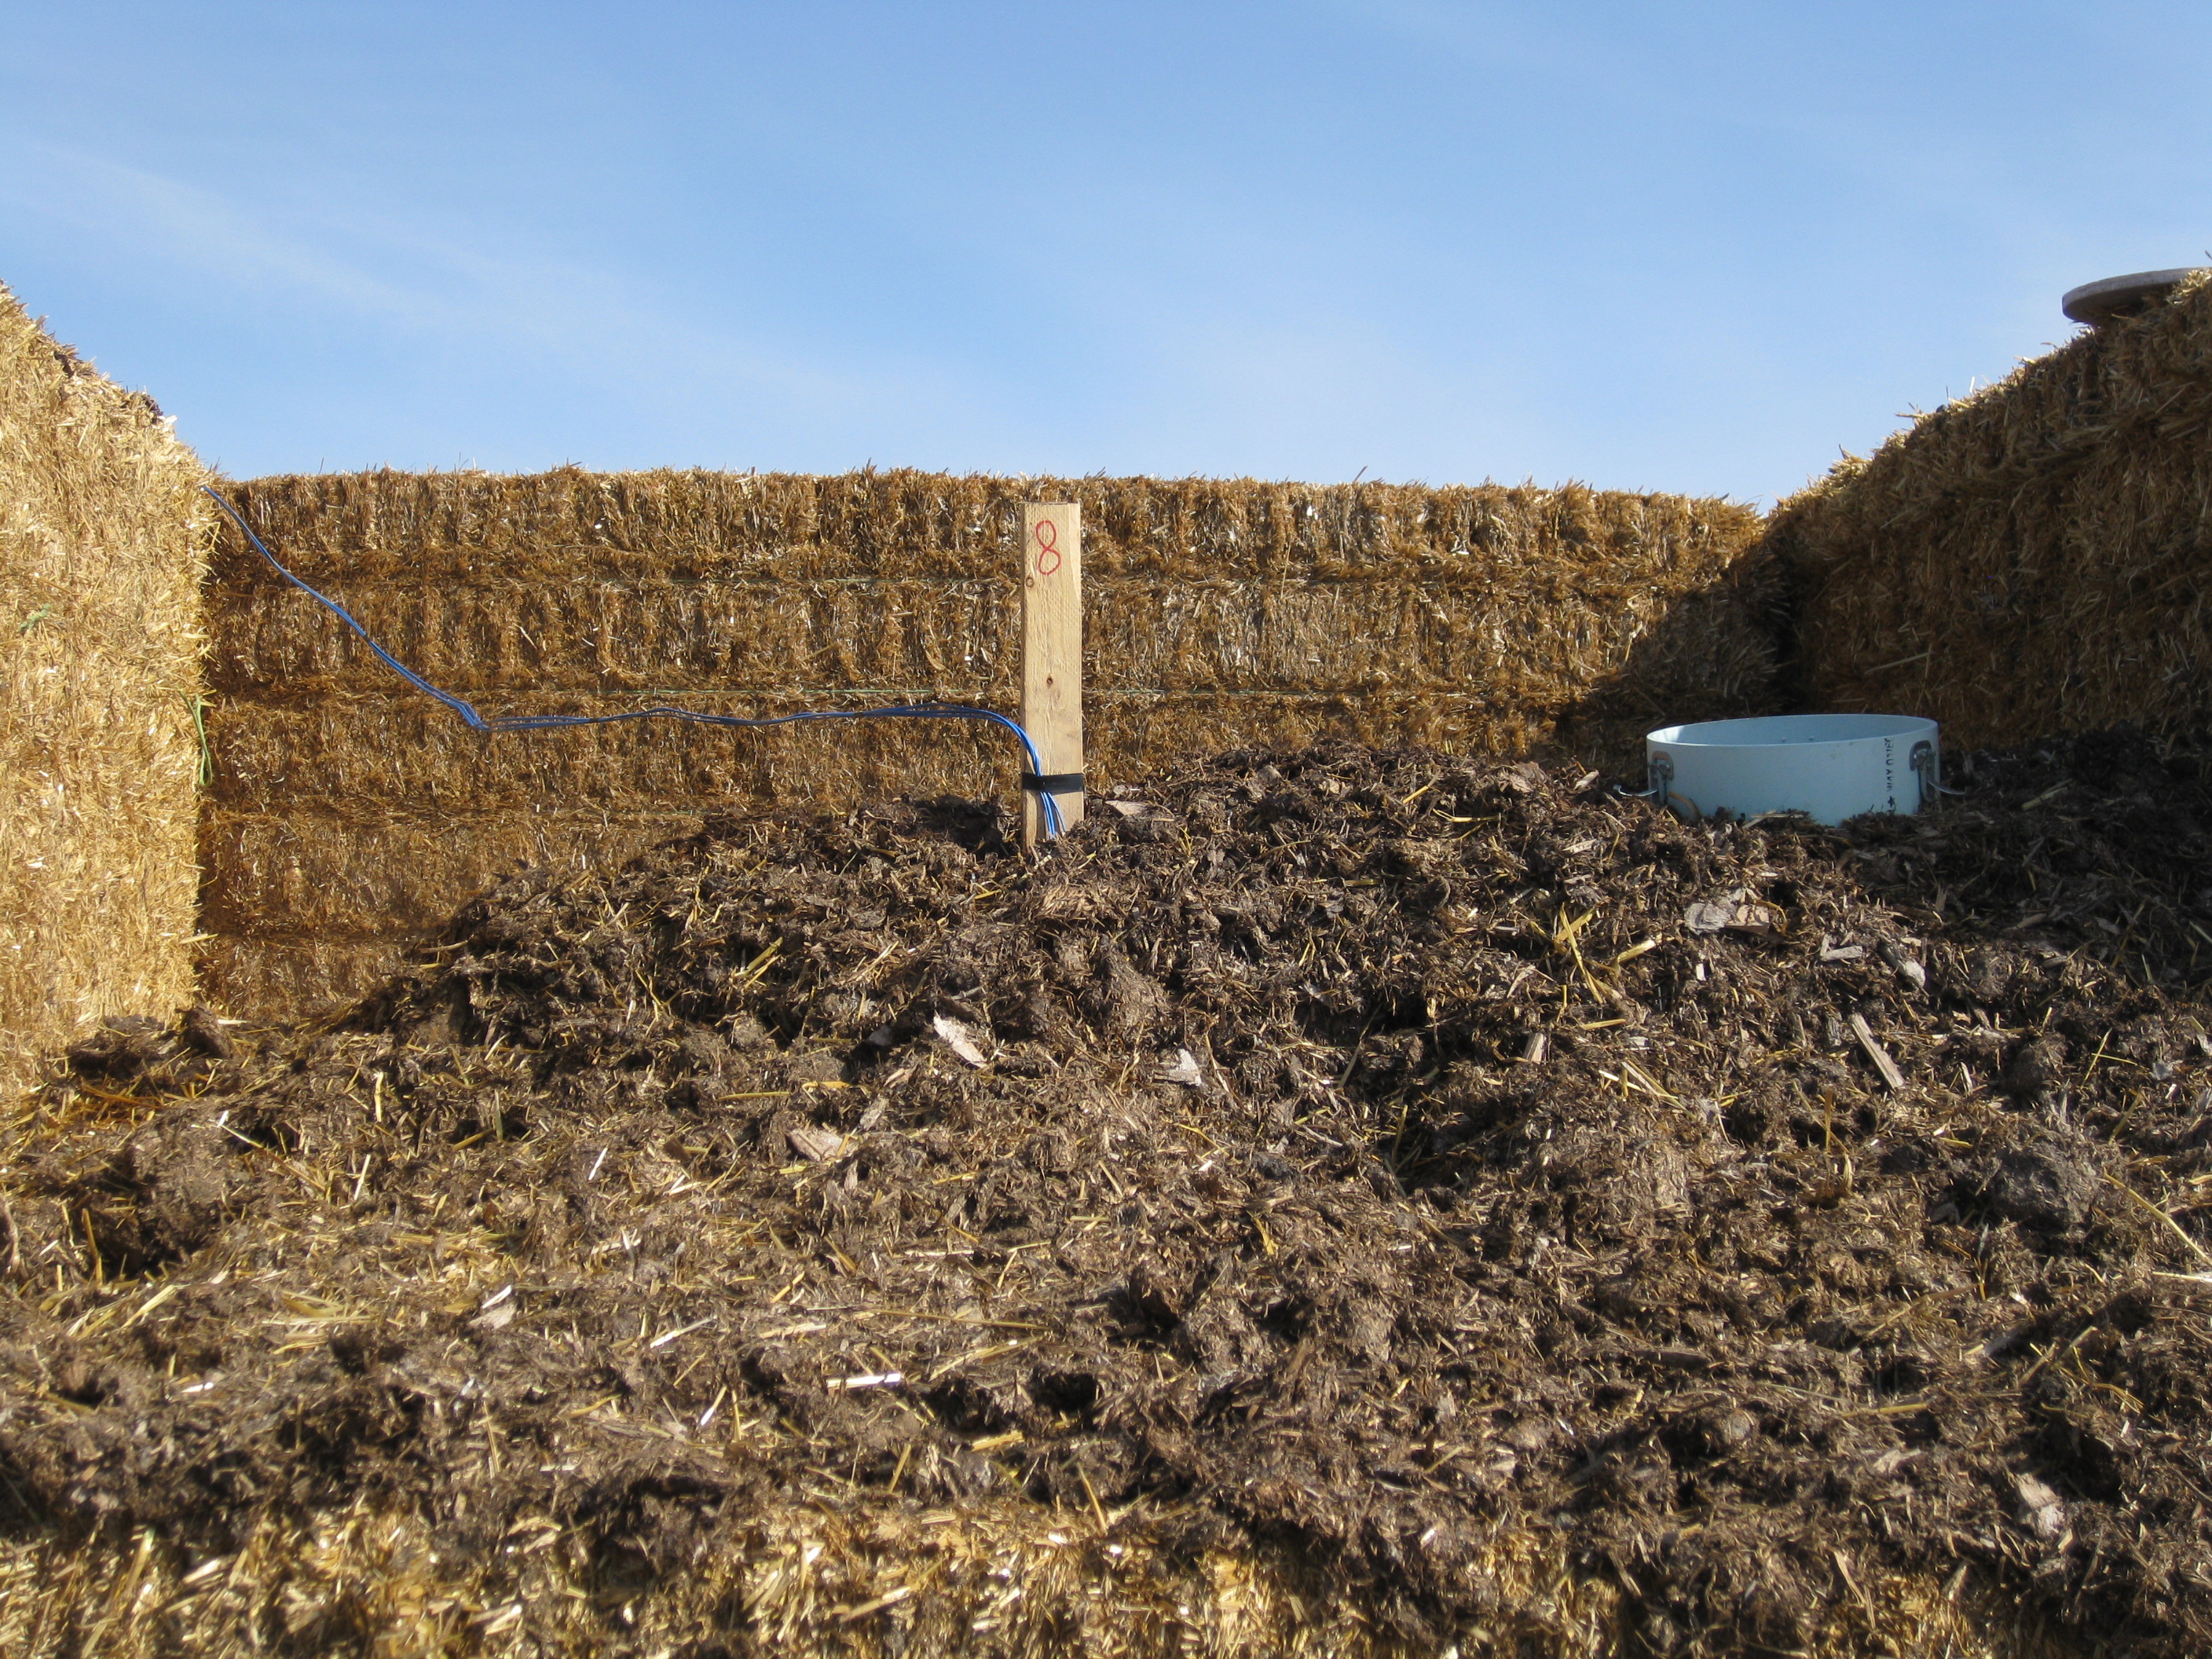 Large straw bales of hay acting as barrier to manure.